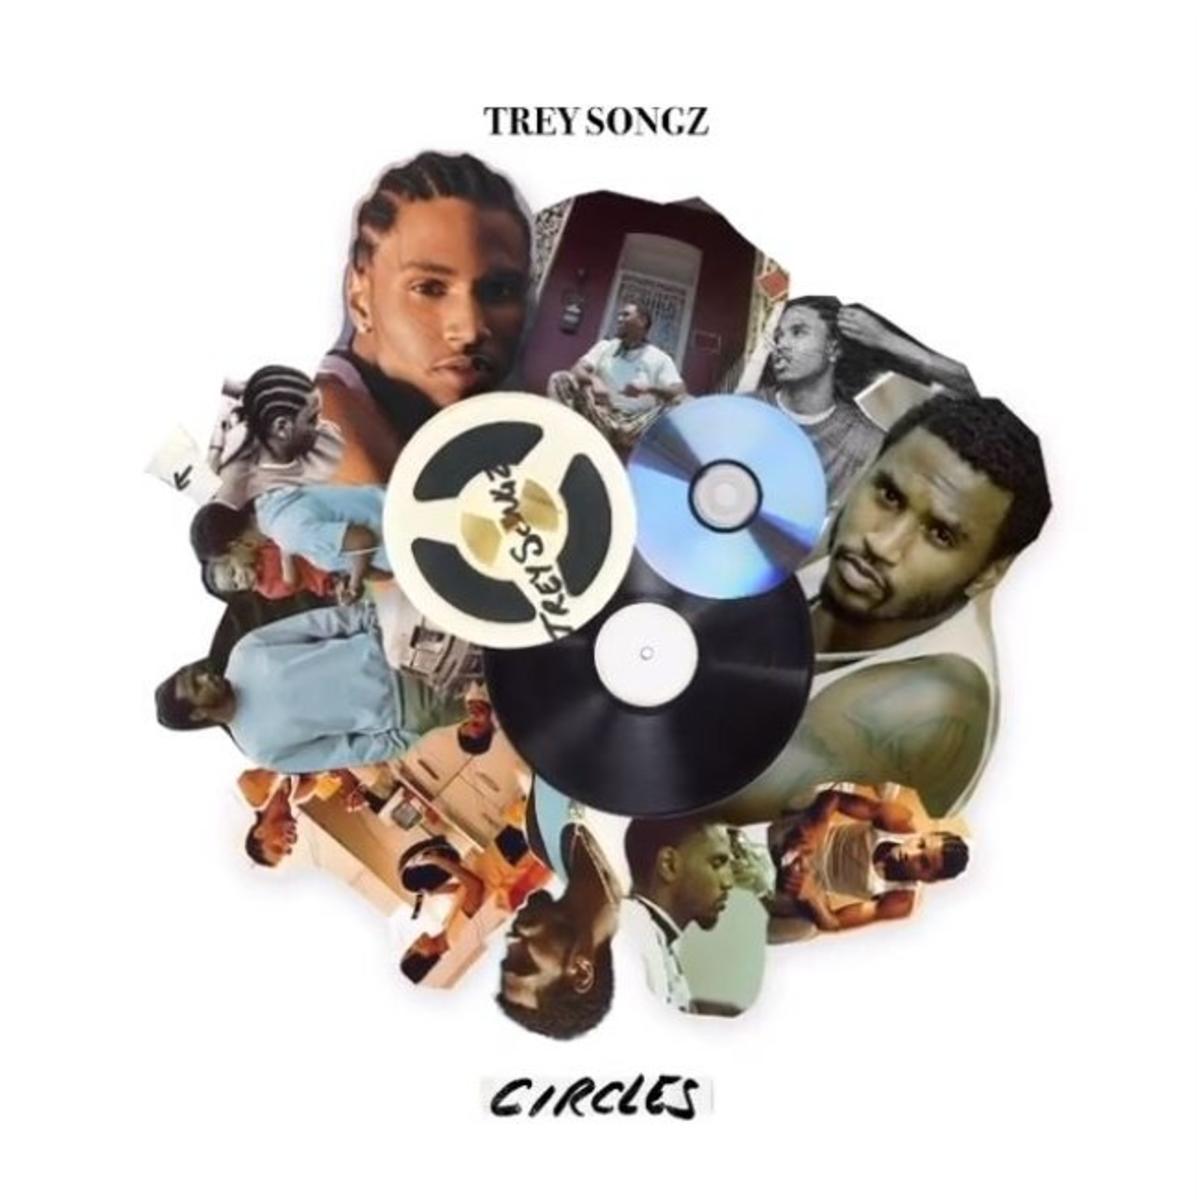 Trey Songz Blesses Us With “Circles”